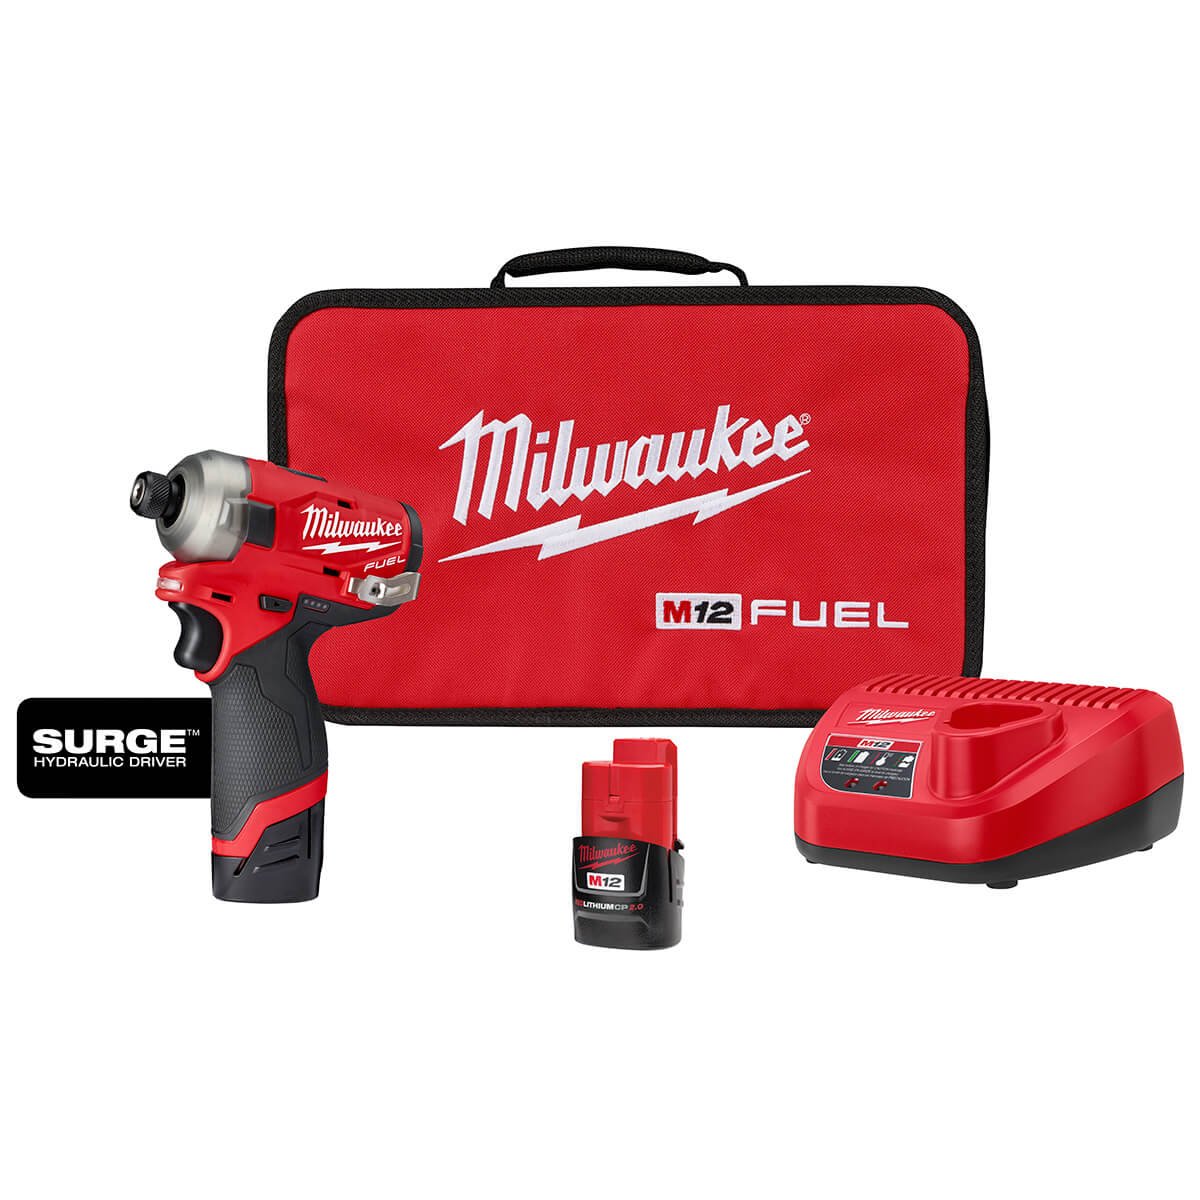 Milwaukee 2551-22 - M12 FUEL™ SURGE™ 1/4" Hex Hydraulic Driver 2 Battery Kit